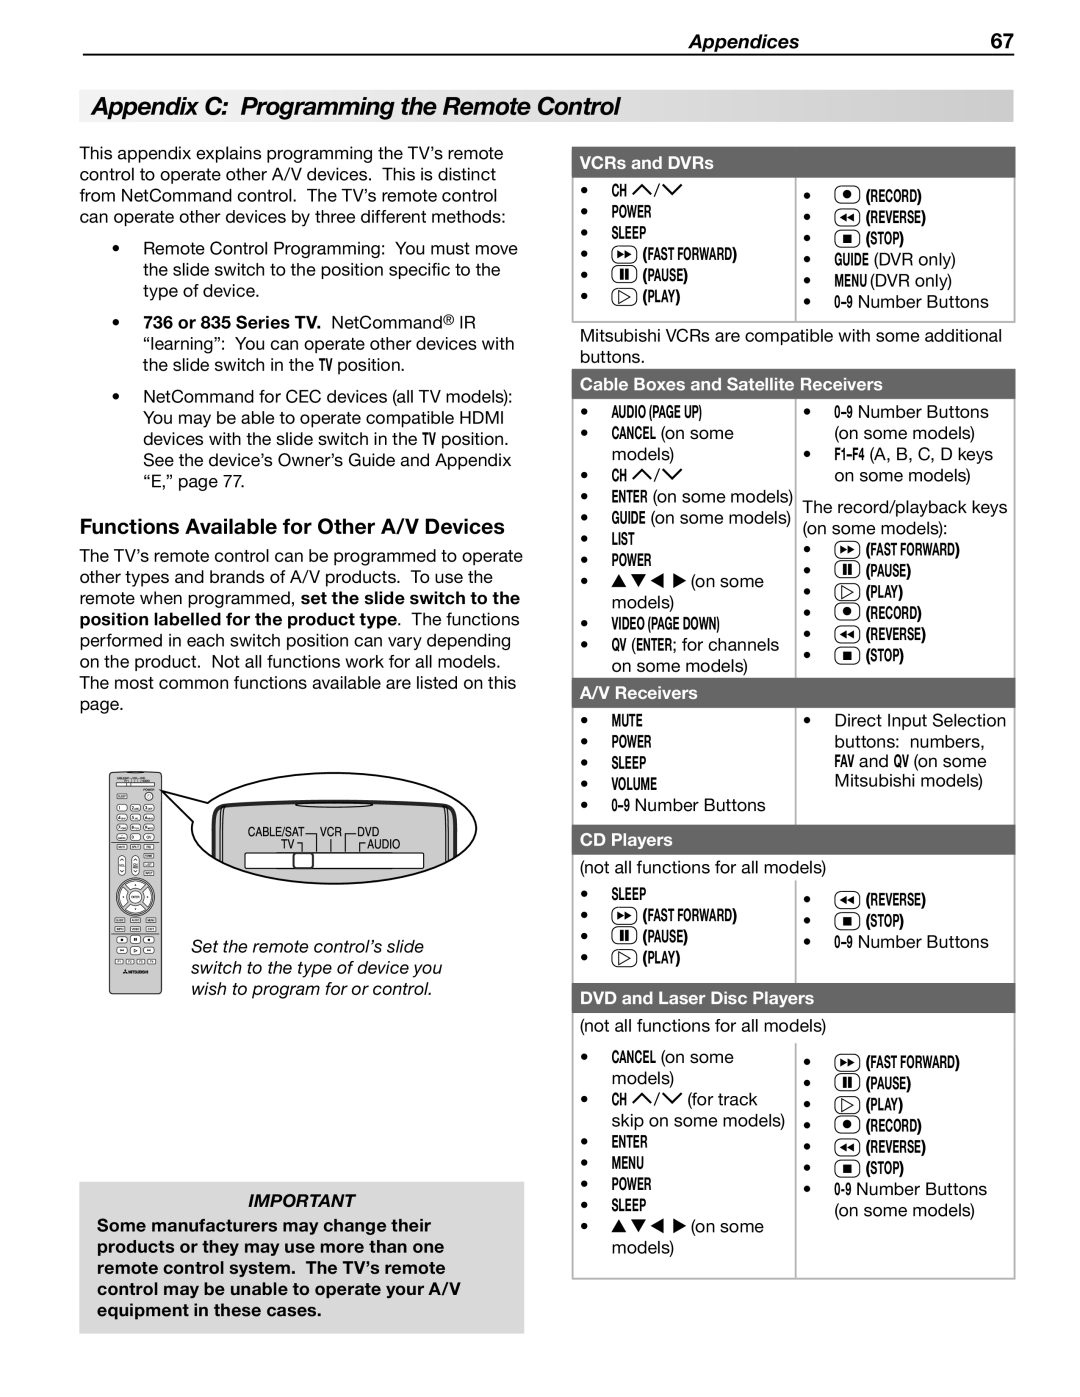 Mitsubishi Electronics WD-60C8 manual Appendix C Programming the Remote Control, Functions Available for Other A/V Devices 